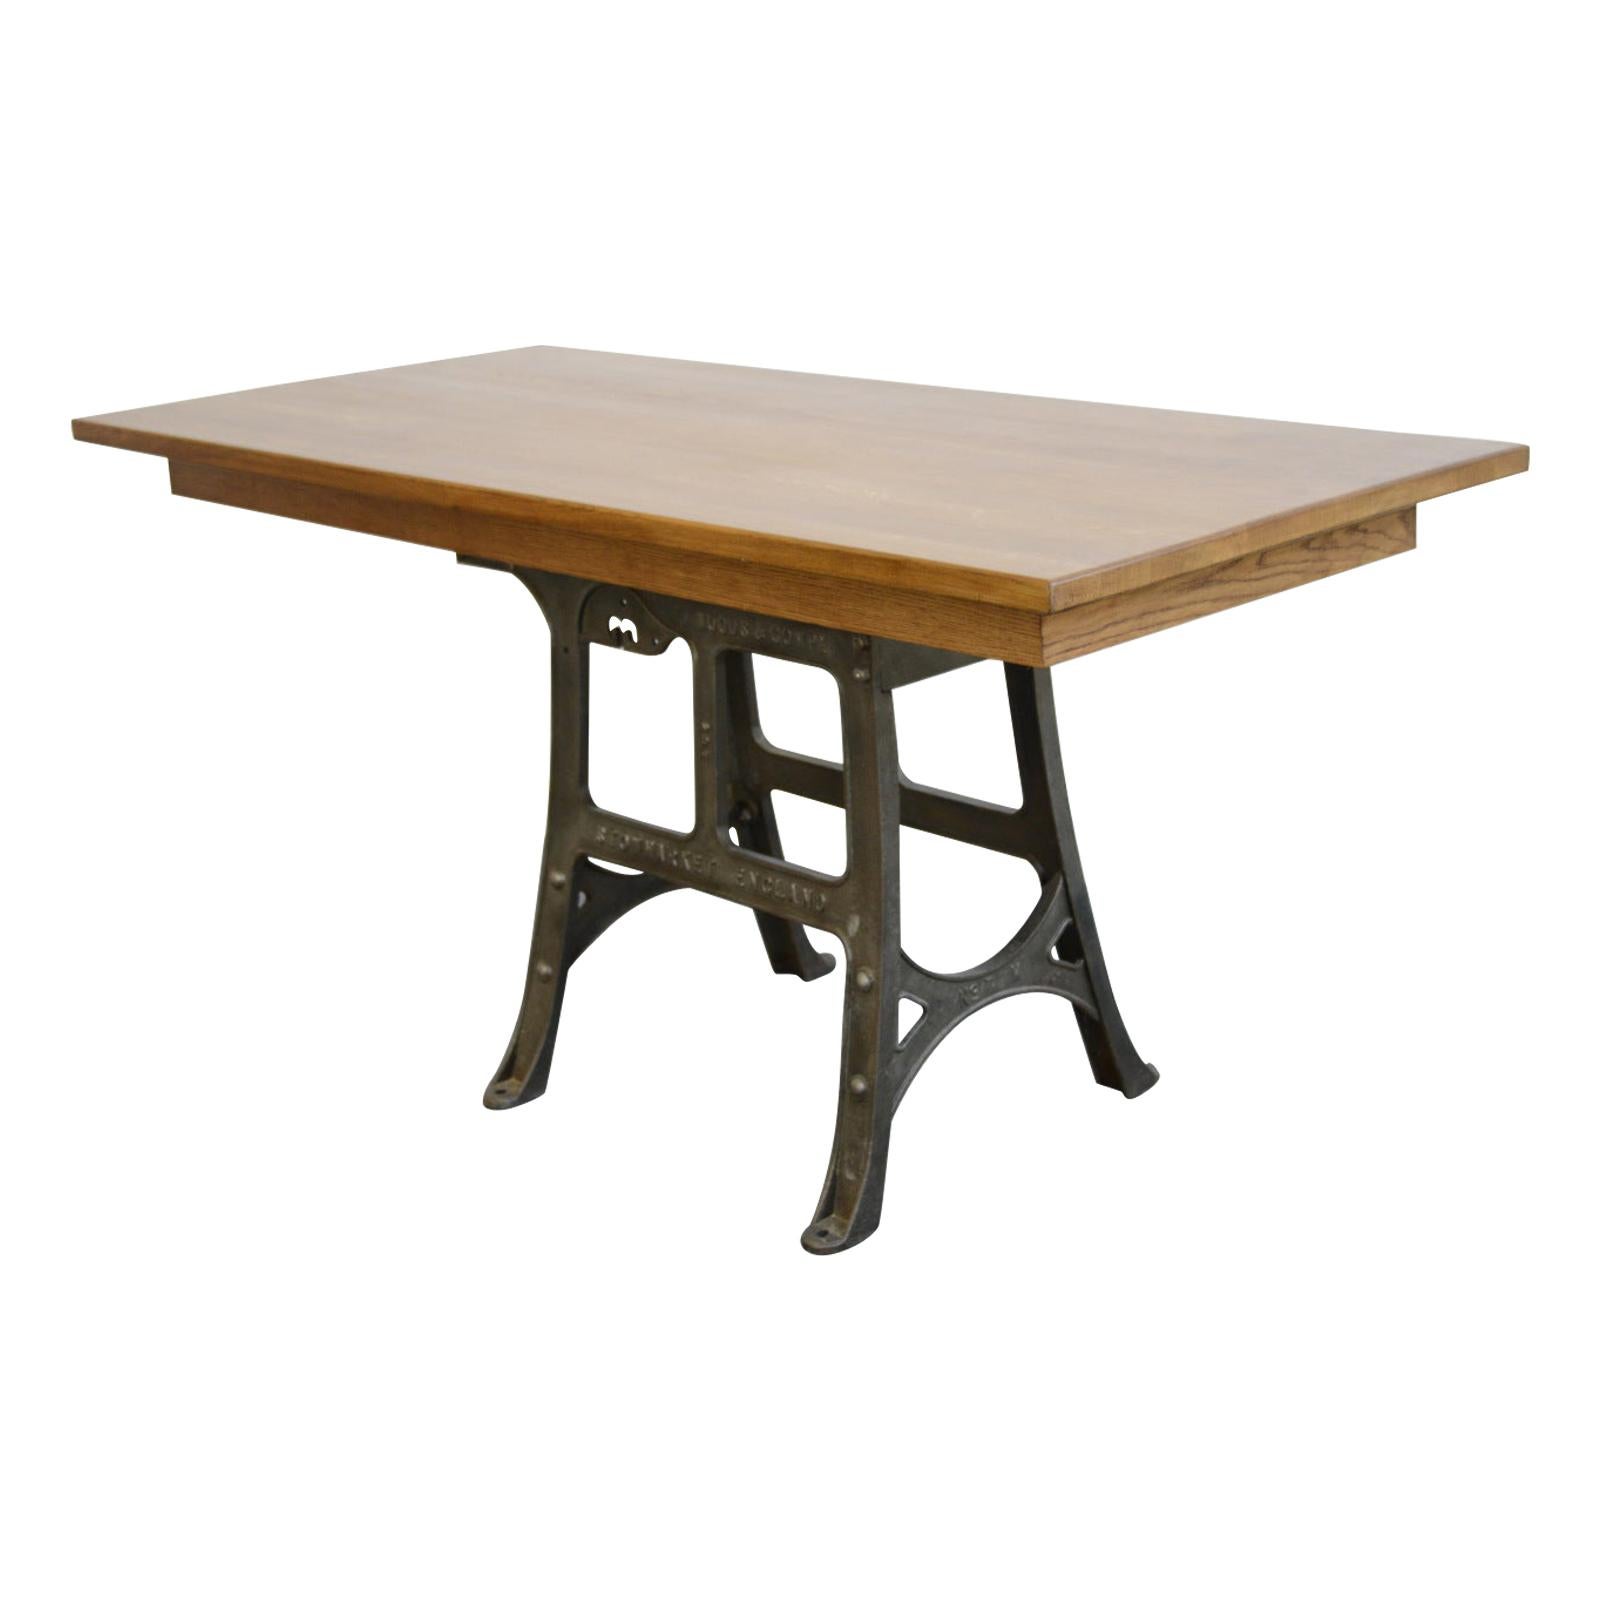 Large Industrial Table by Woods & Co., circa 1910